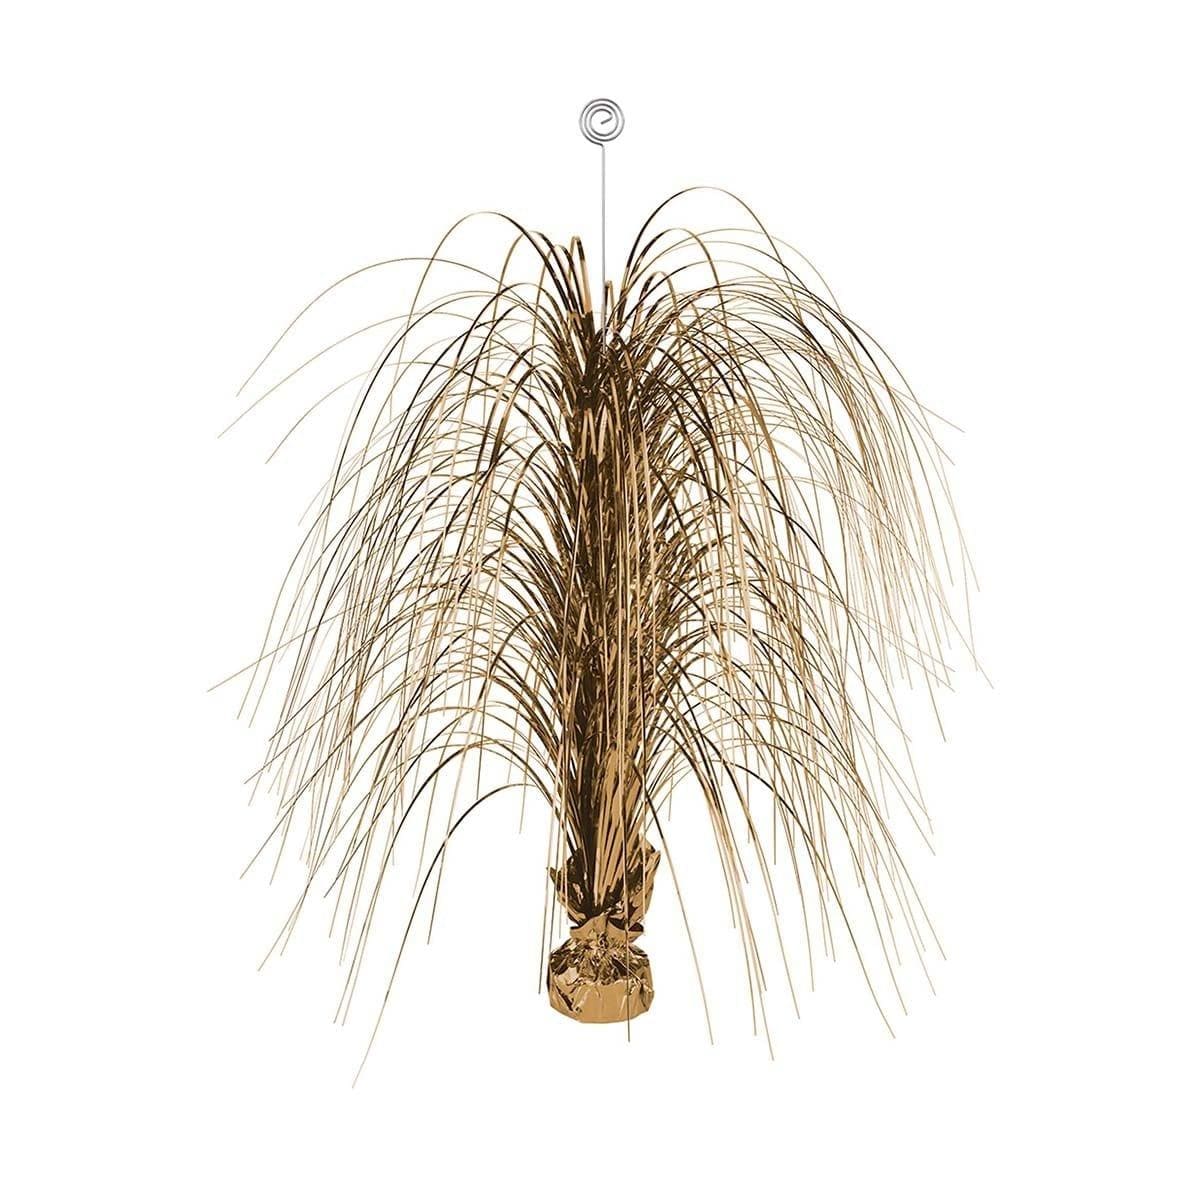 Buy Decorations Spray Centerpiece 32 In. - Gold sold at Party Expert